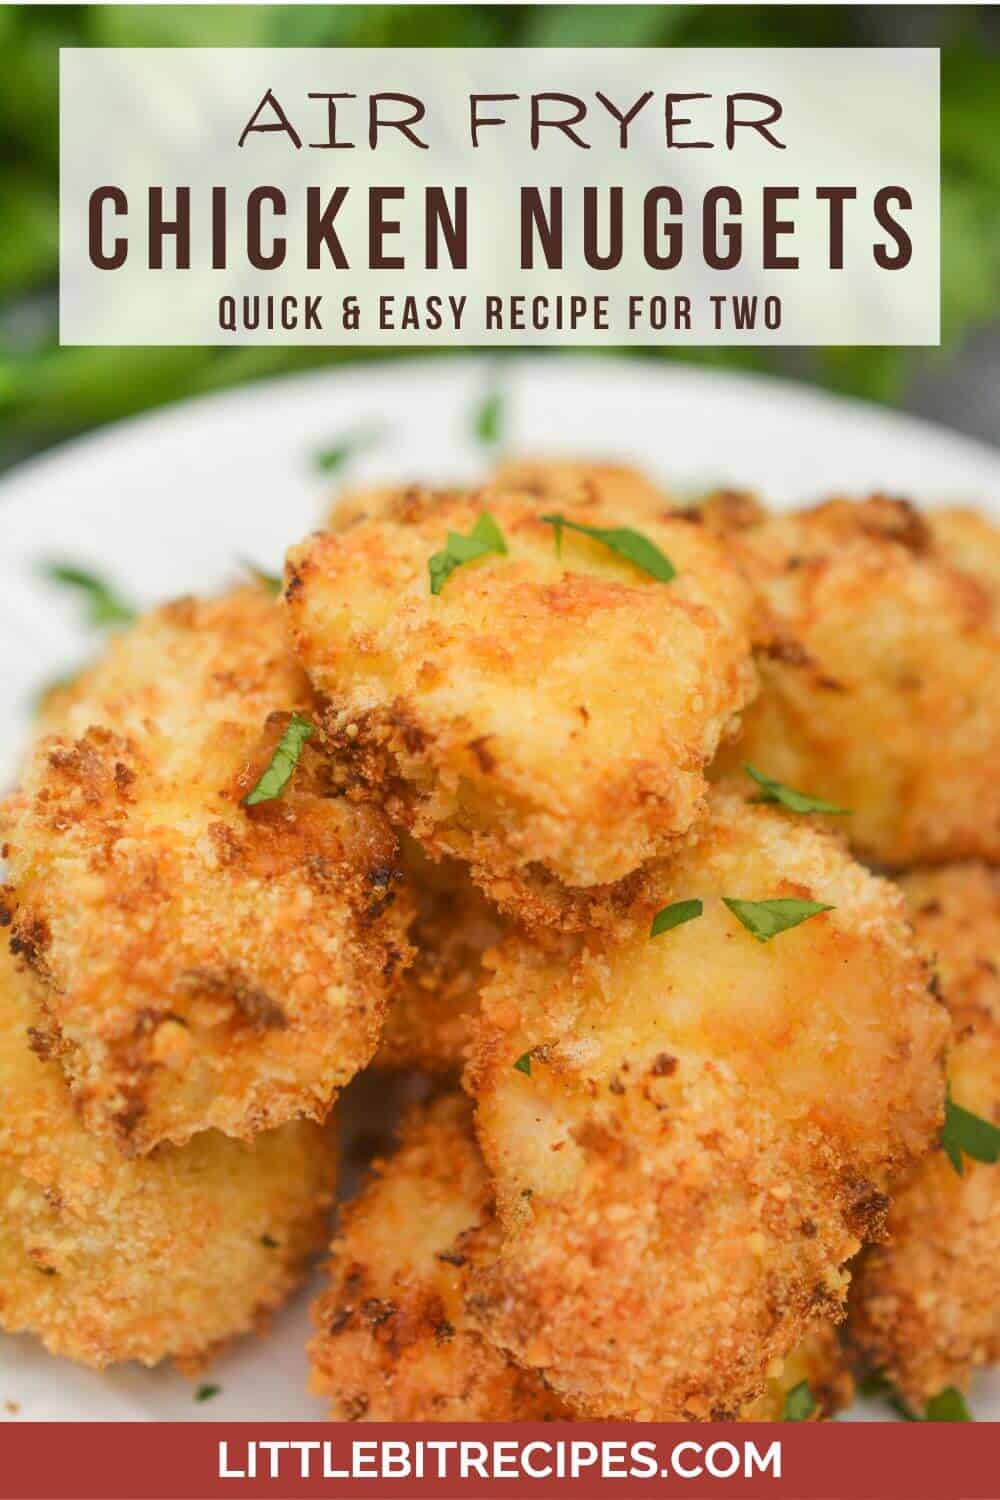 Air fryer chicken nuggets with text.